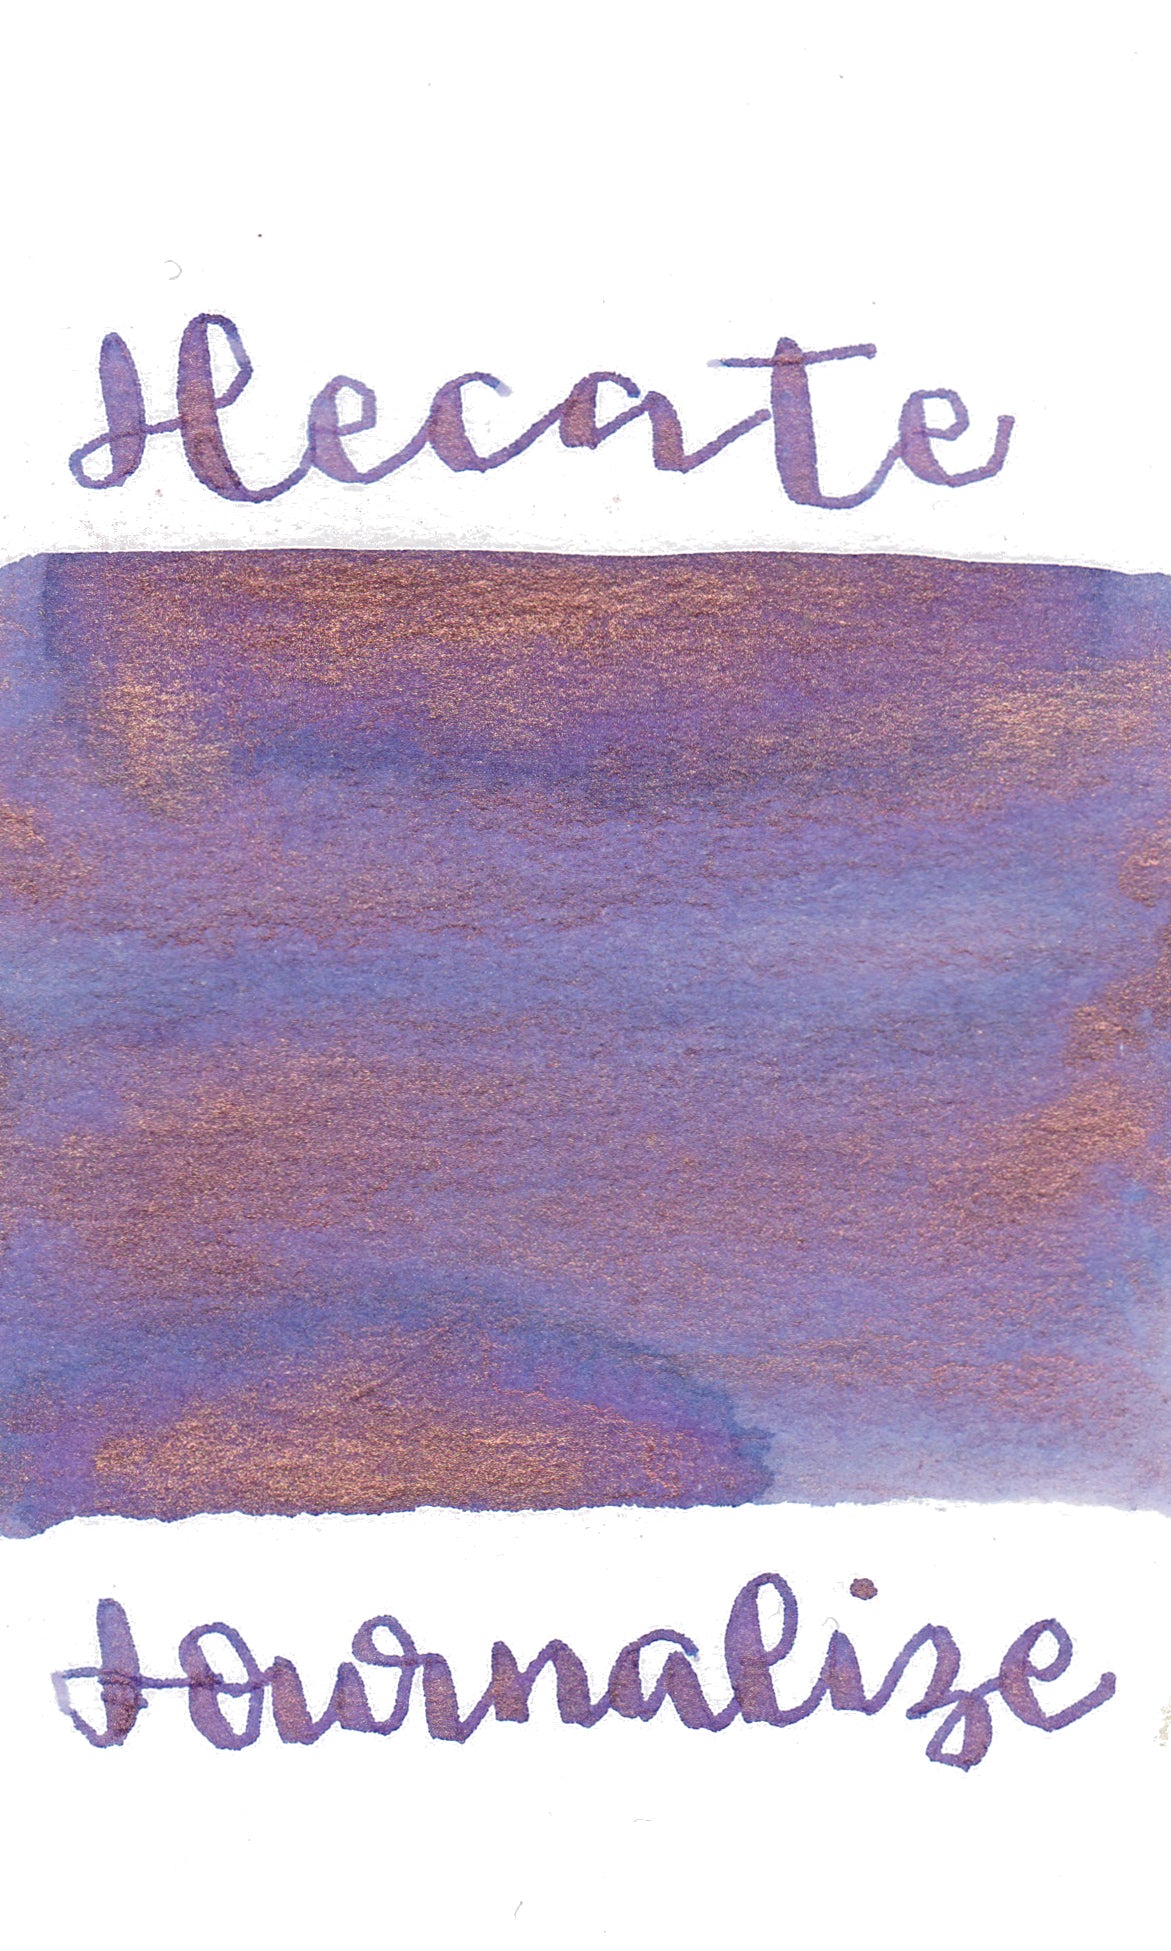 Journalize - Whimsical - Hecate